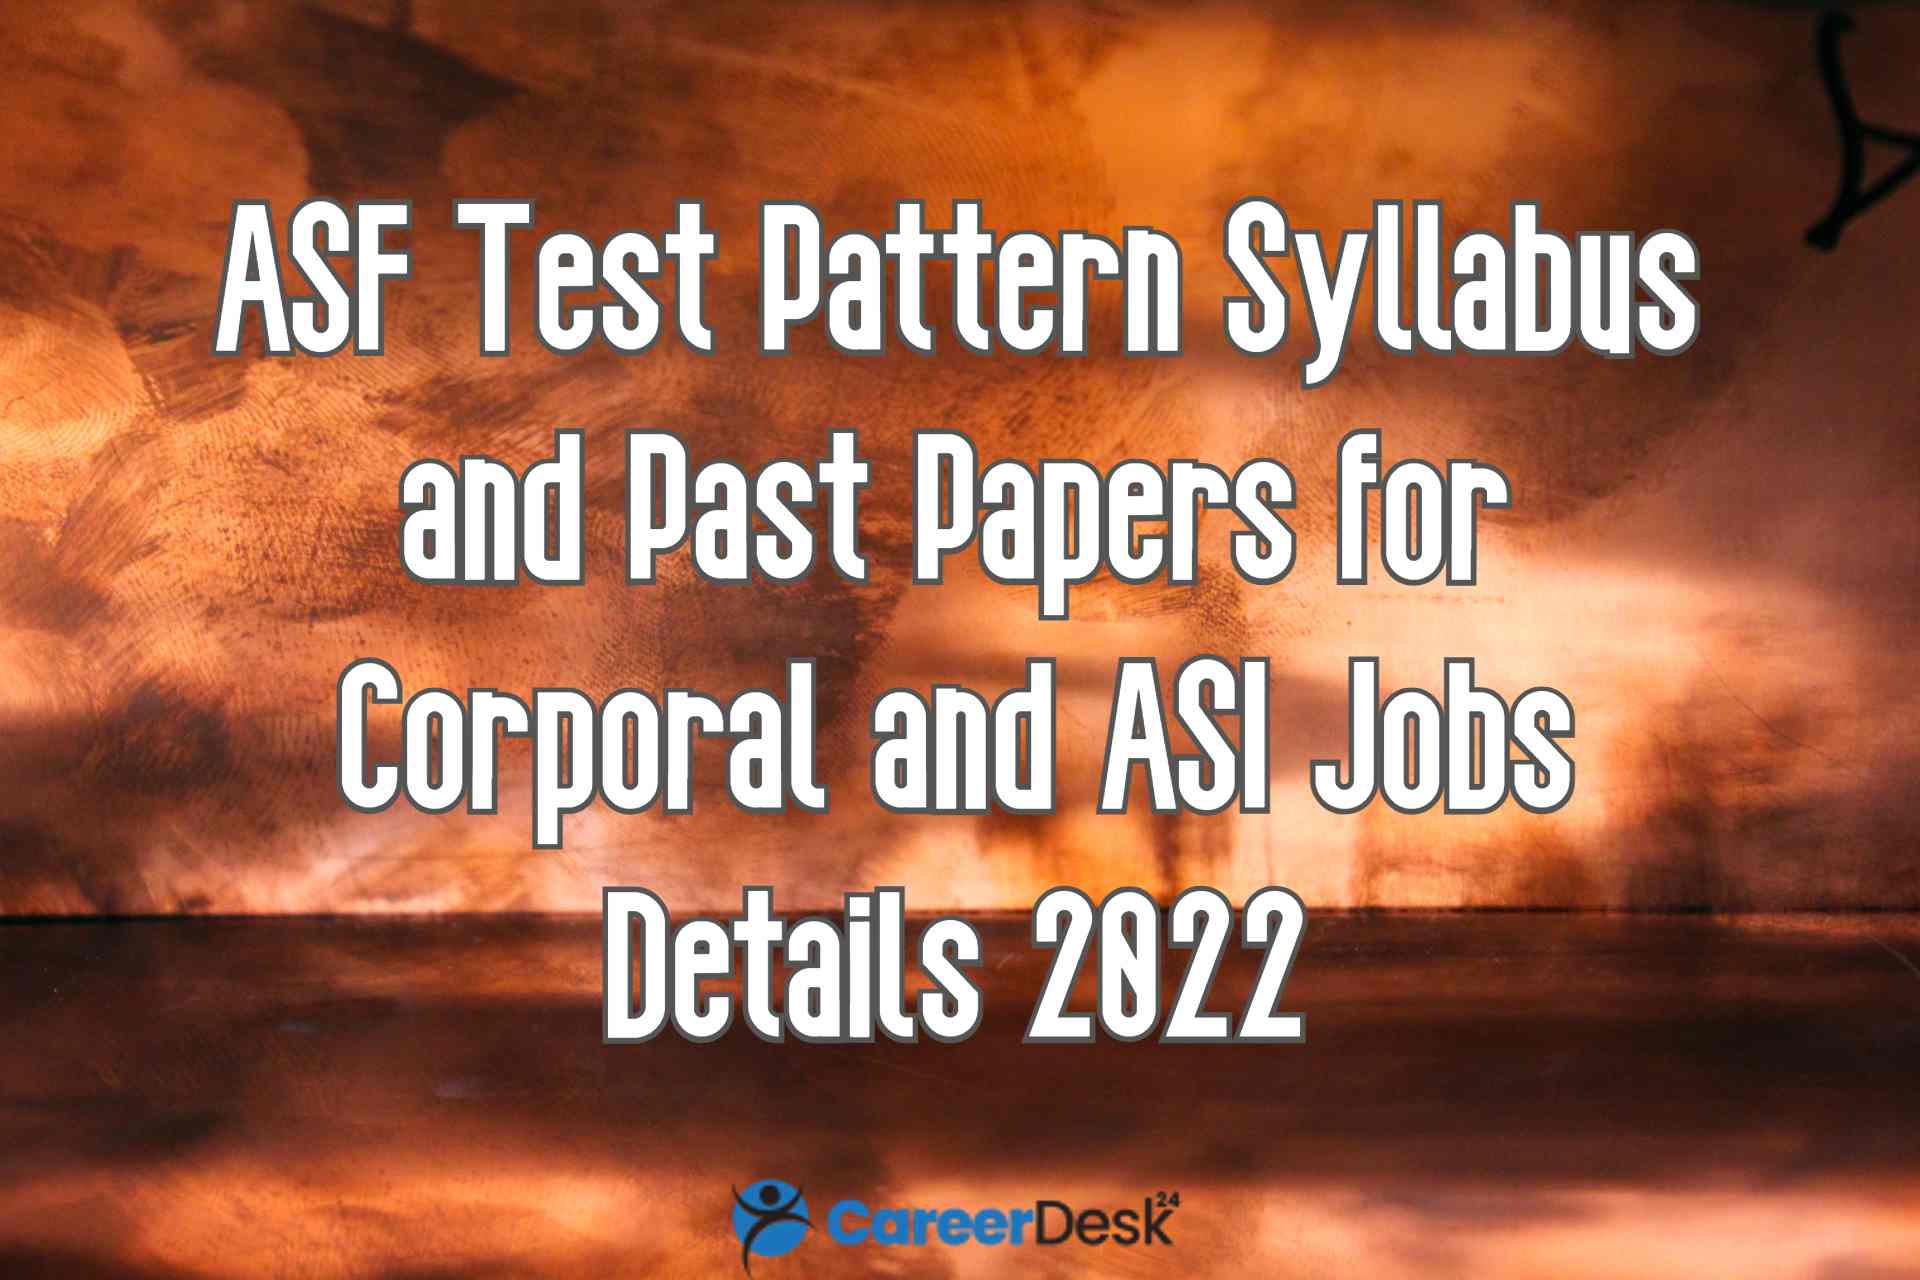 ASF Test Pattern Syllabus and Past Papers for Corporal and ASI Jobs Details 2022